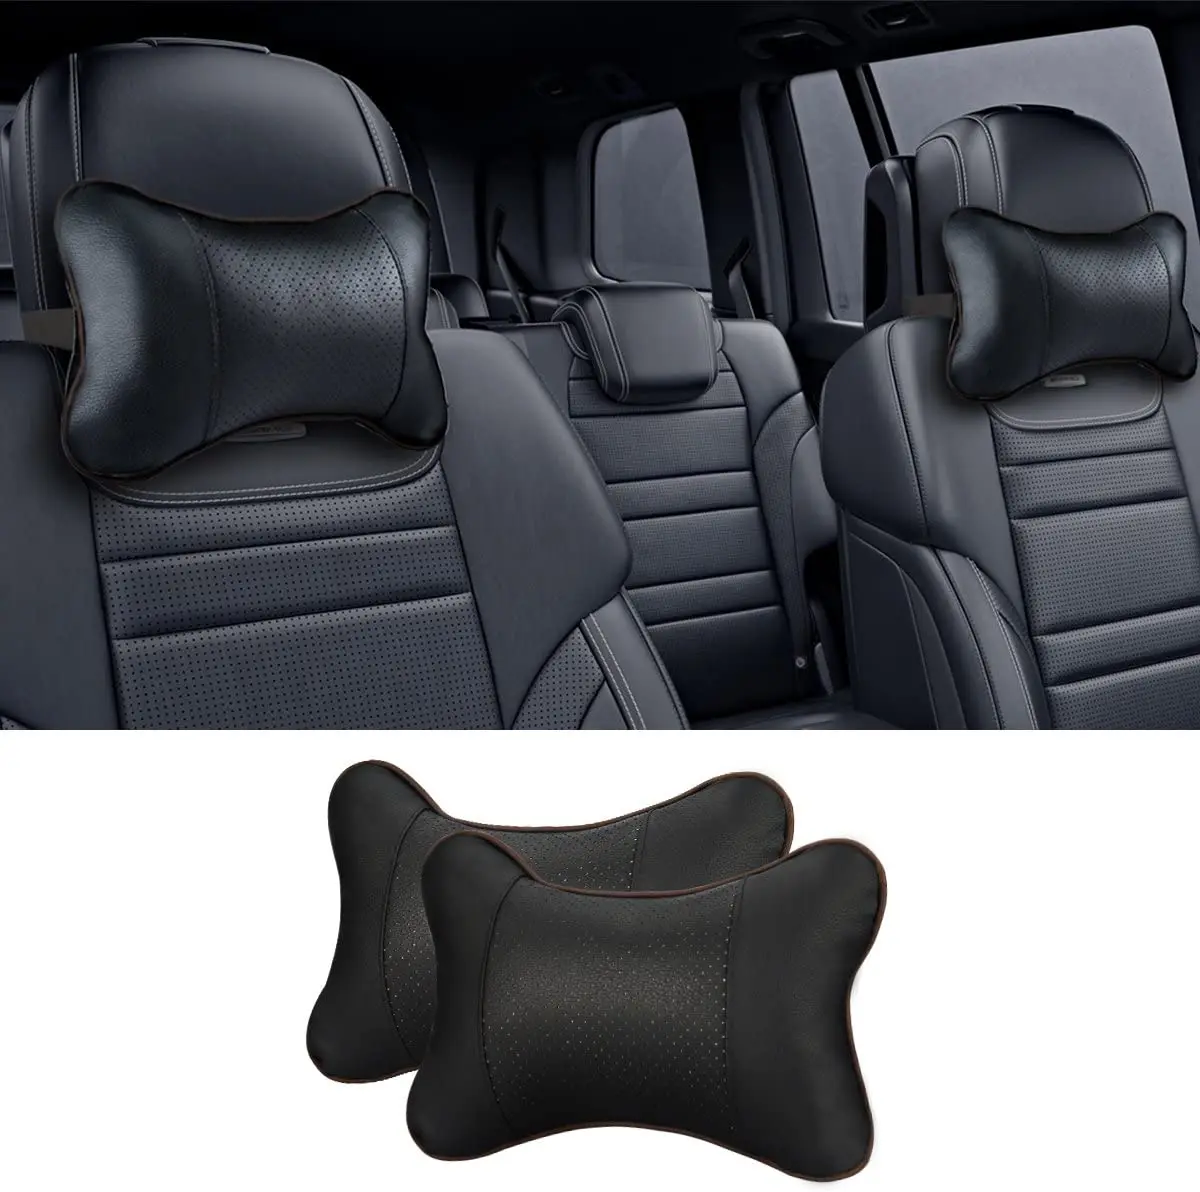 

1 Pcs Car Neck Pillows Pu Leather Head Support Protector Black/Red Universal Headrest Backrest Cushion Fit For All Vehicles